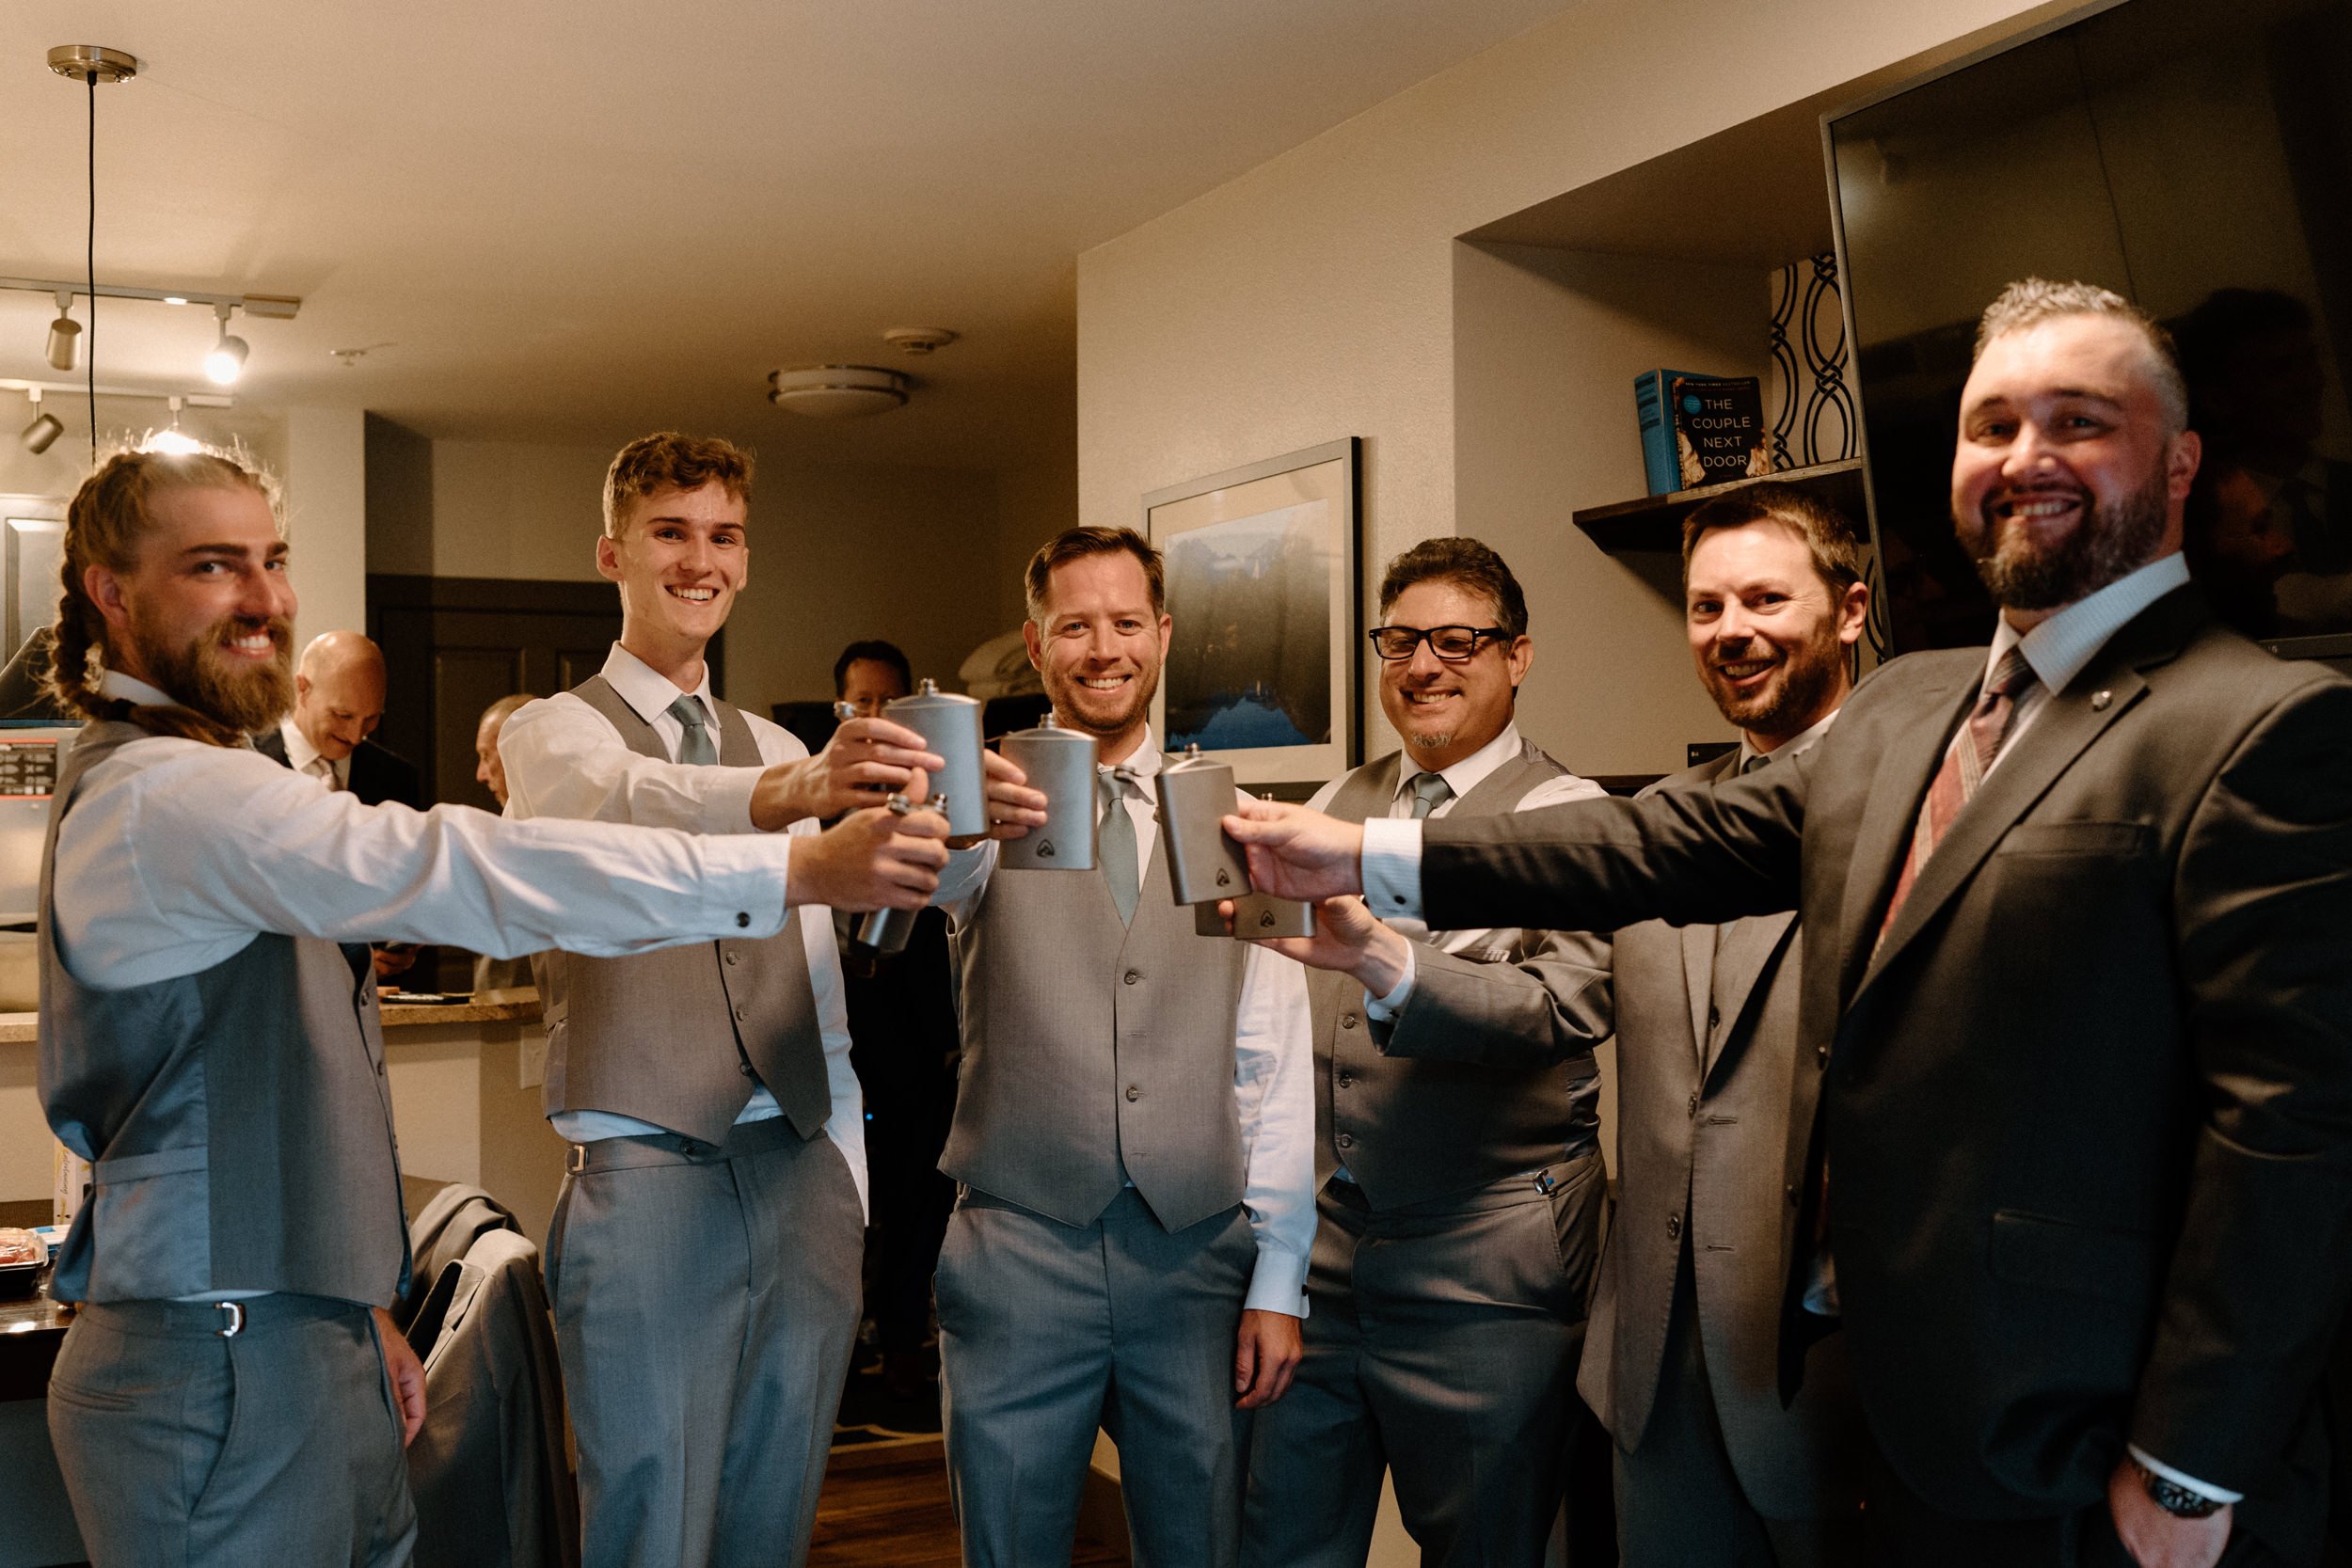 The groomsmen hold up their matching flasks in a toast